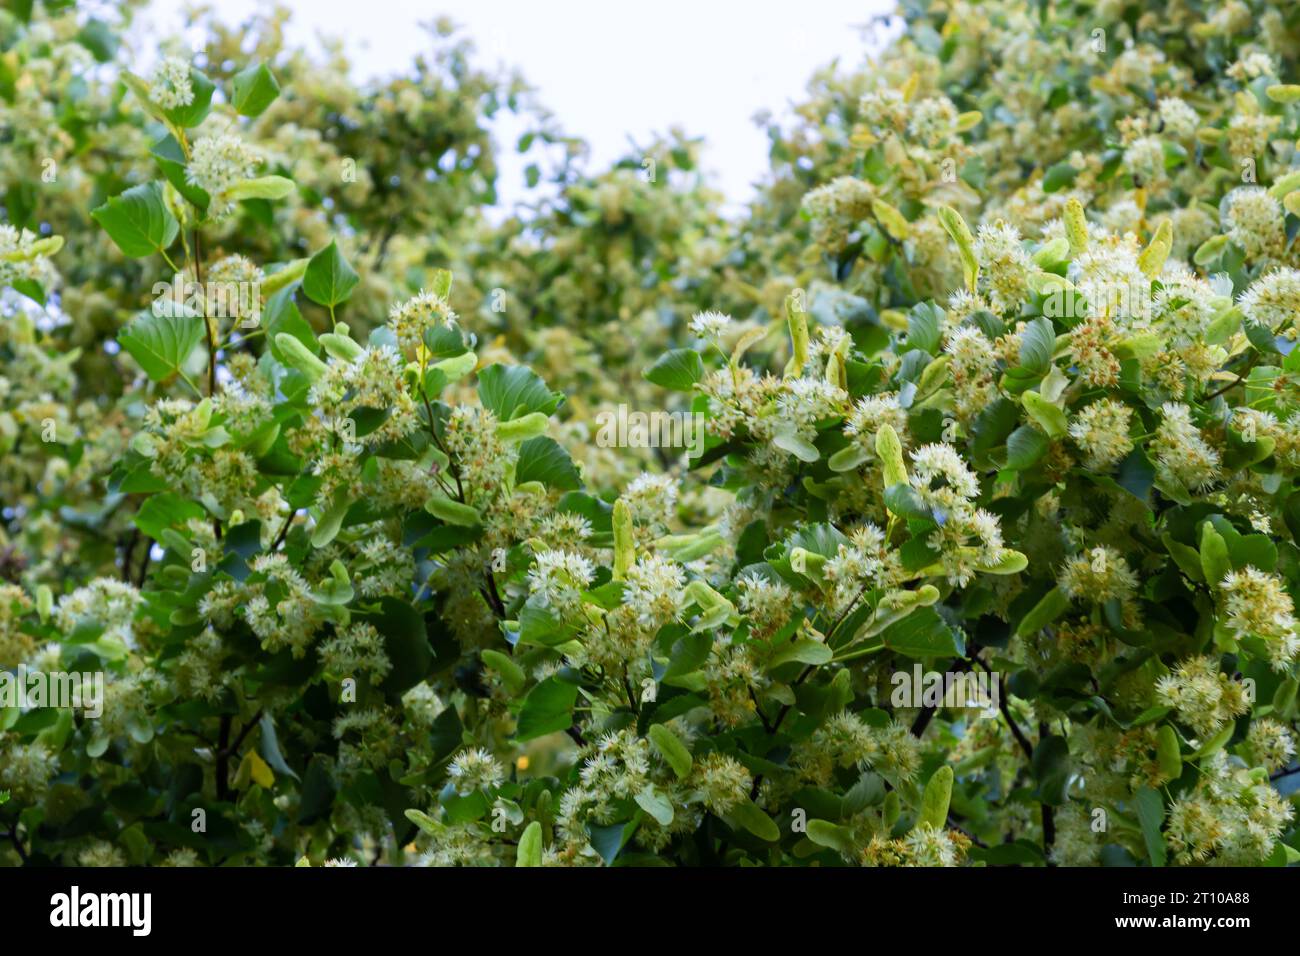 Linden tree flowers clusters tilia cordata, europea, small-leaved lime, littleleaf linden bloom. Pharmacy, apothecary, natural medicine, healing herba Stock Photo